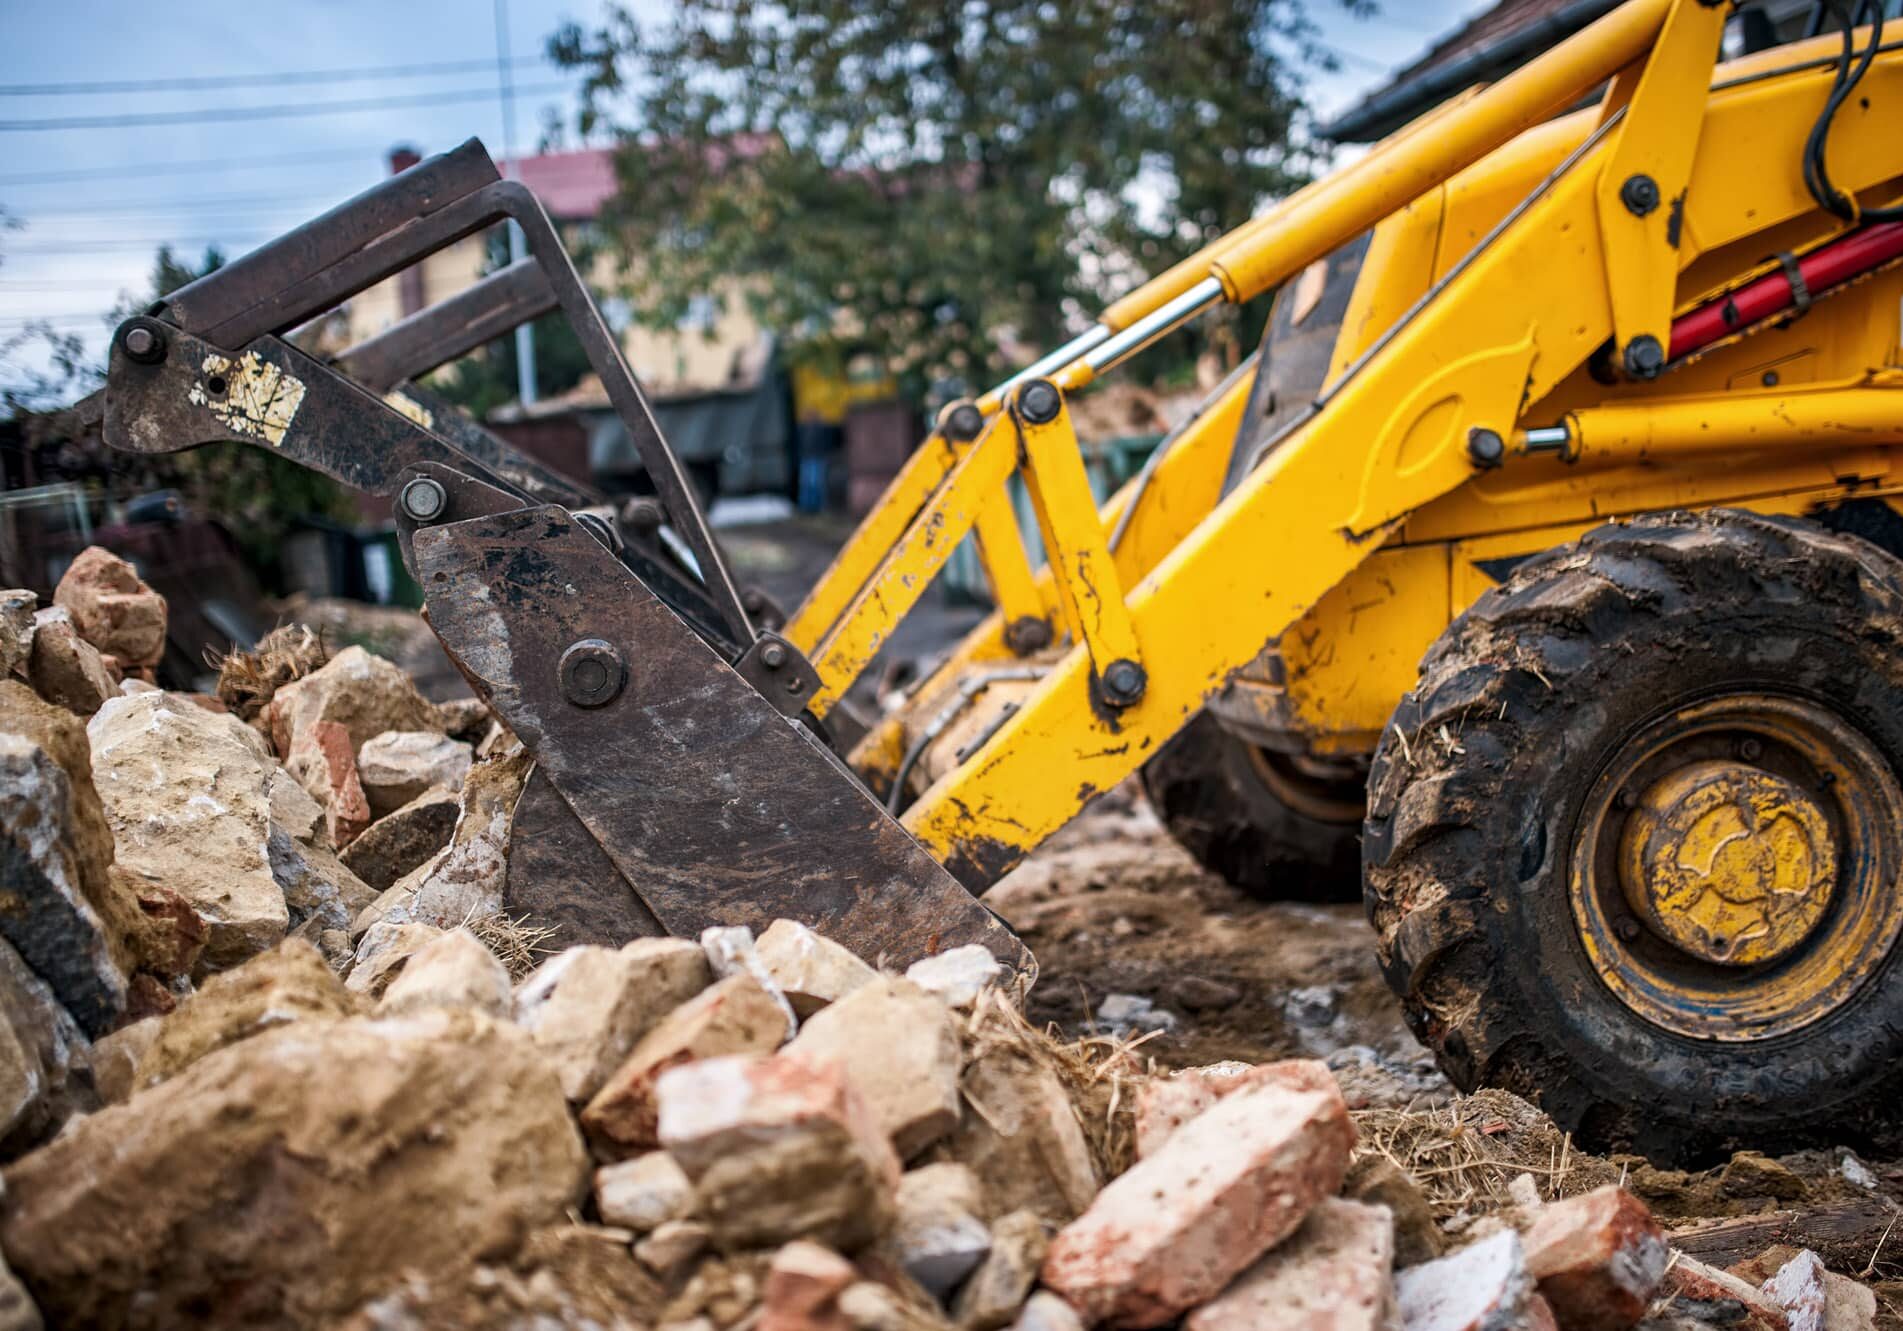 Yellow construction backhoe with extended bucket among rubble and debris at a demolition site.